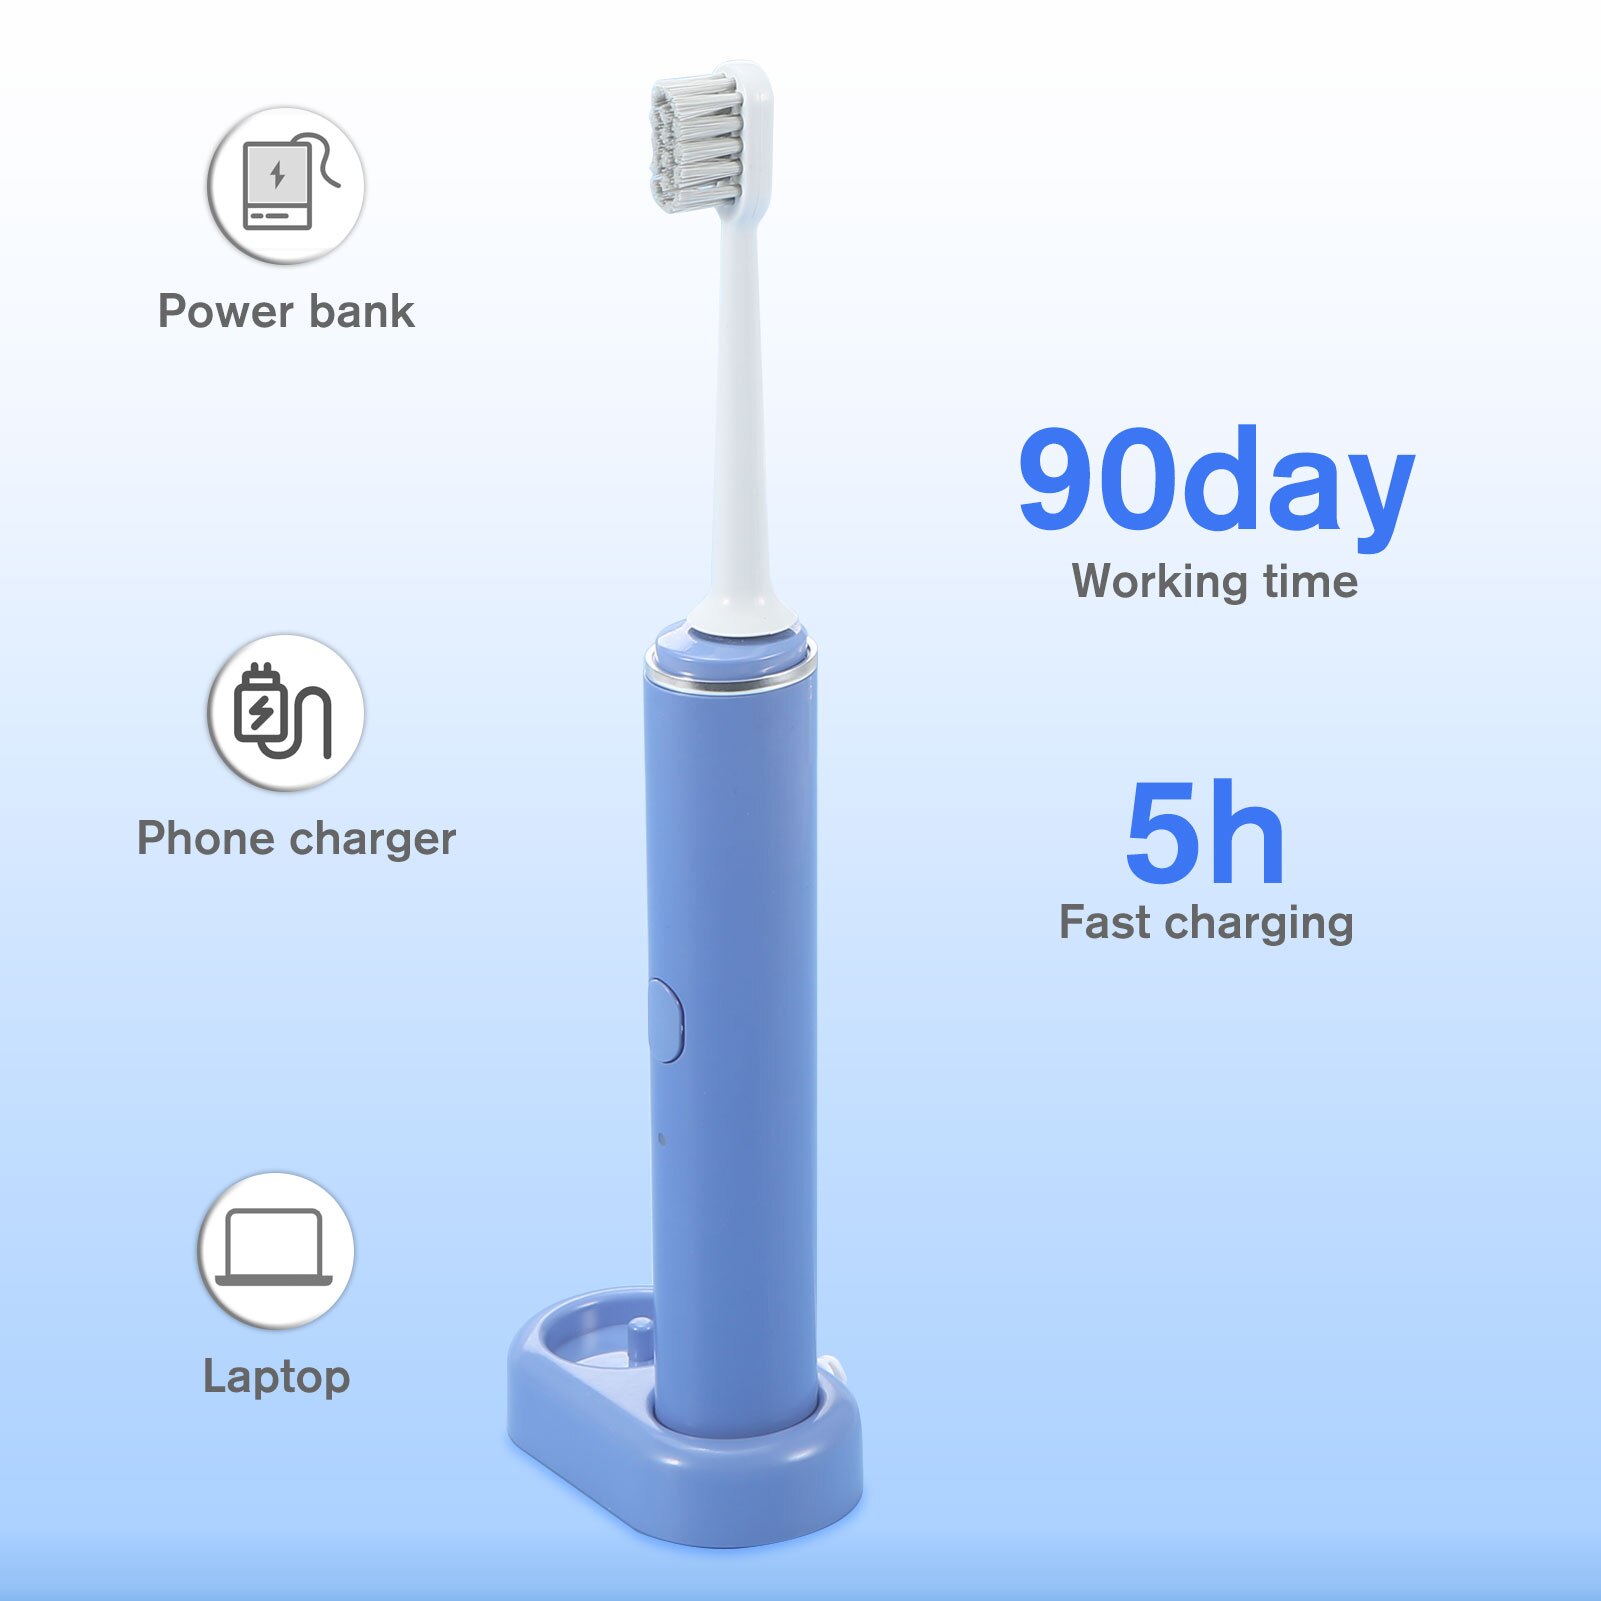 Sonic Electric Toothbrush Ultrasonic Automatic Upgraded USB Rechargeable Fast chargeable Adult Waterproof Tooth Brush